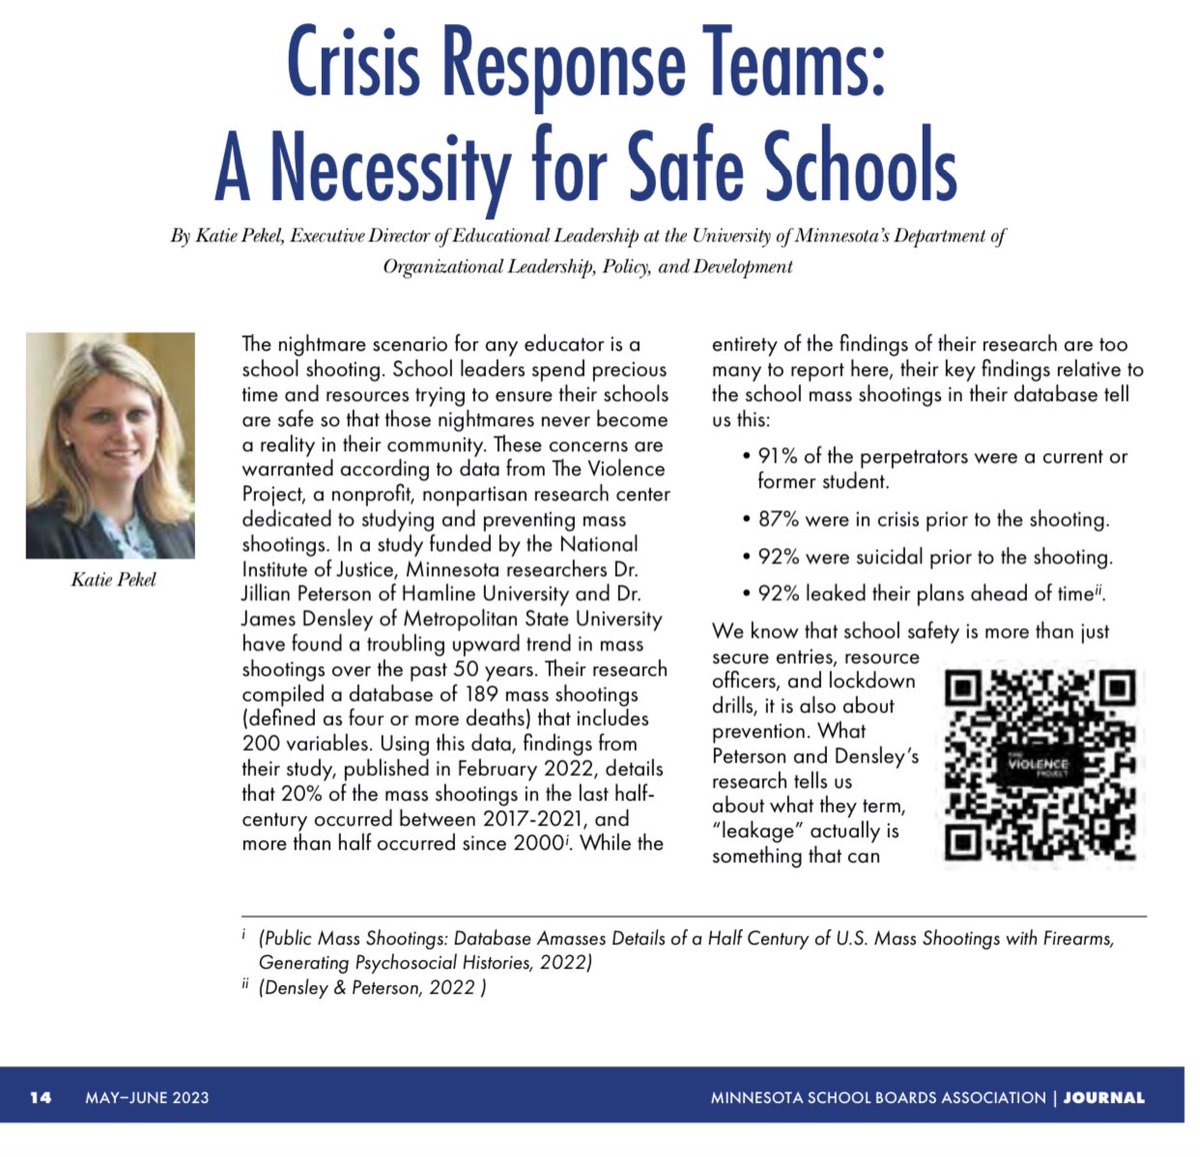 In this issue of the @mnmsba Journal I overview the data the nightmare scenario in school safety and how we can mitigate threats thanks to the work of @jillkpeterson & James Densley @theviolencepro. 

mnmsba.org/wp-content/upl…